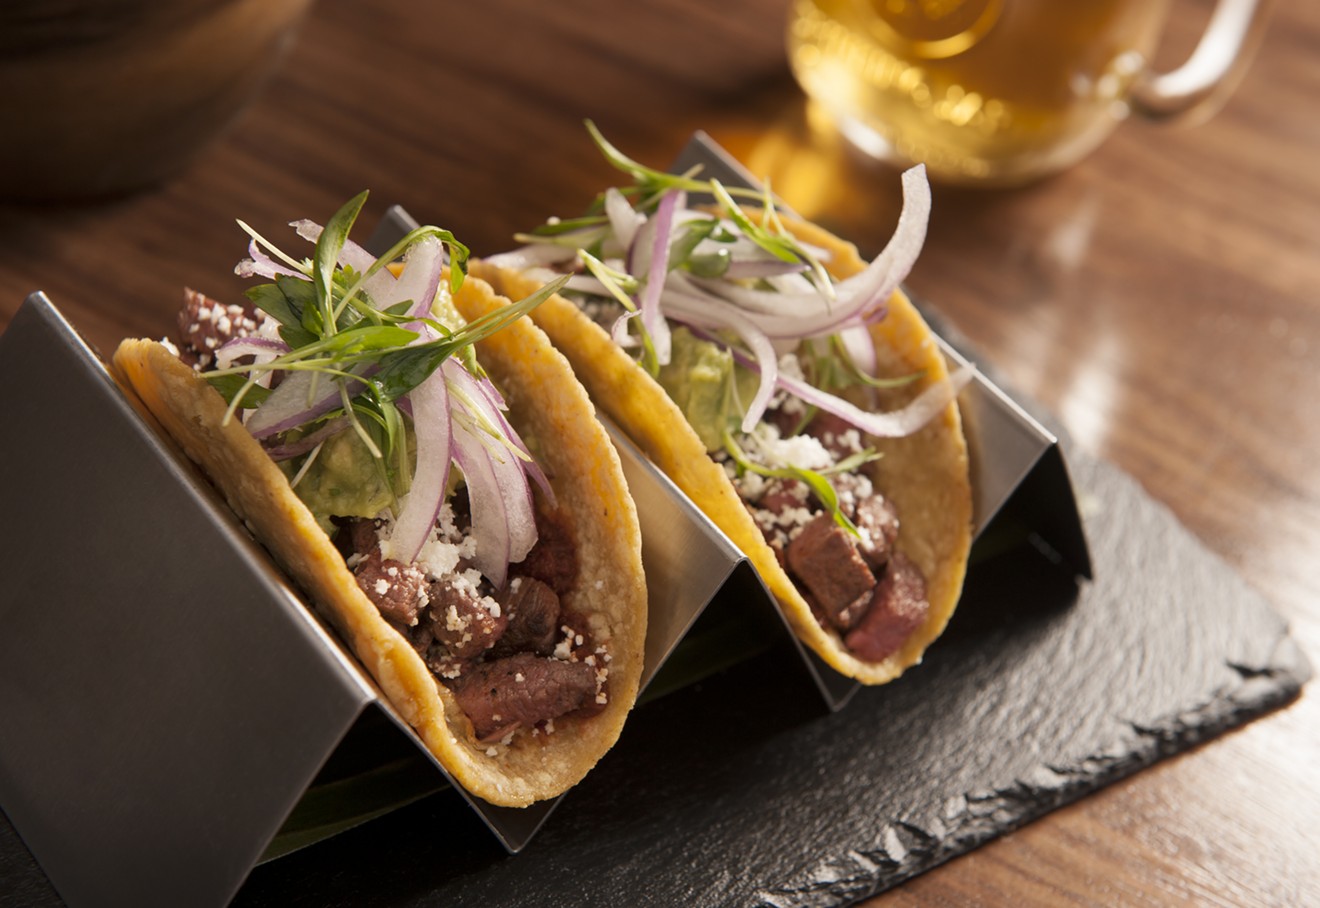 Toca Madera features Mexican cuisine for both meat eaters and vegetarians.